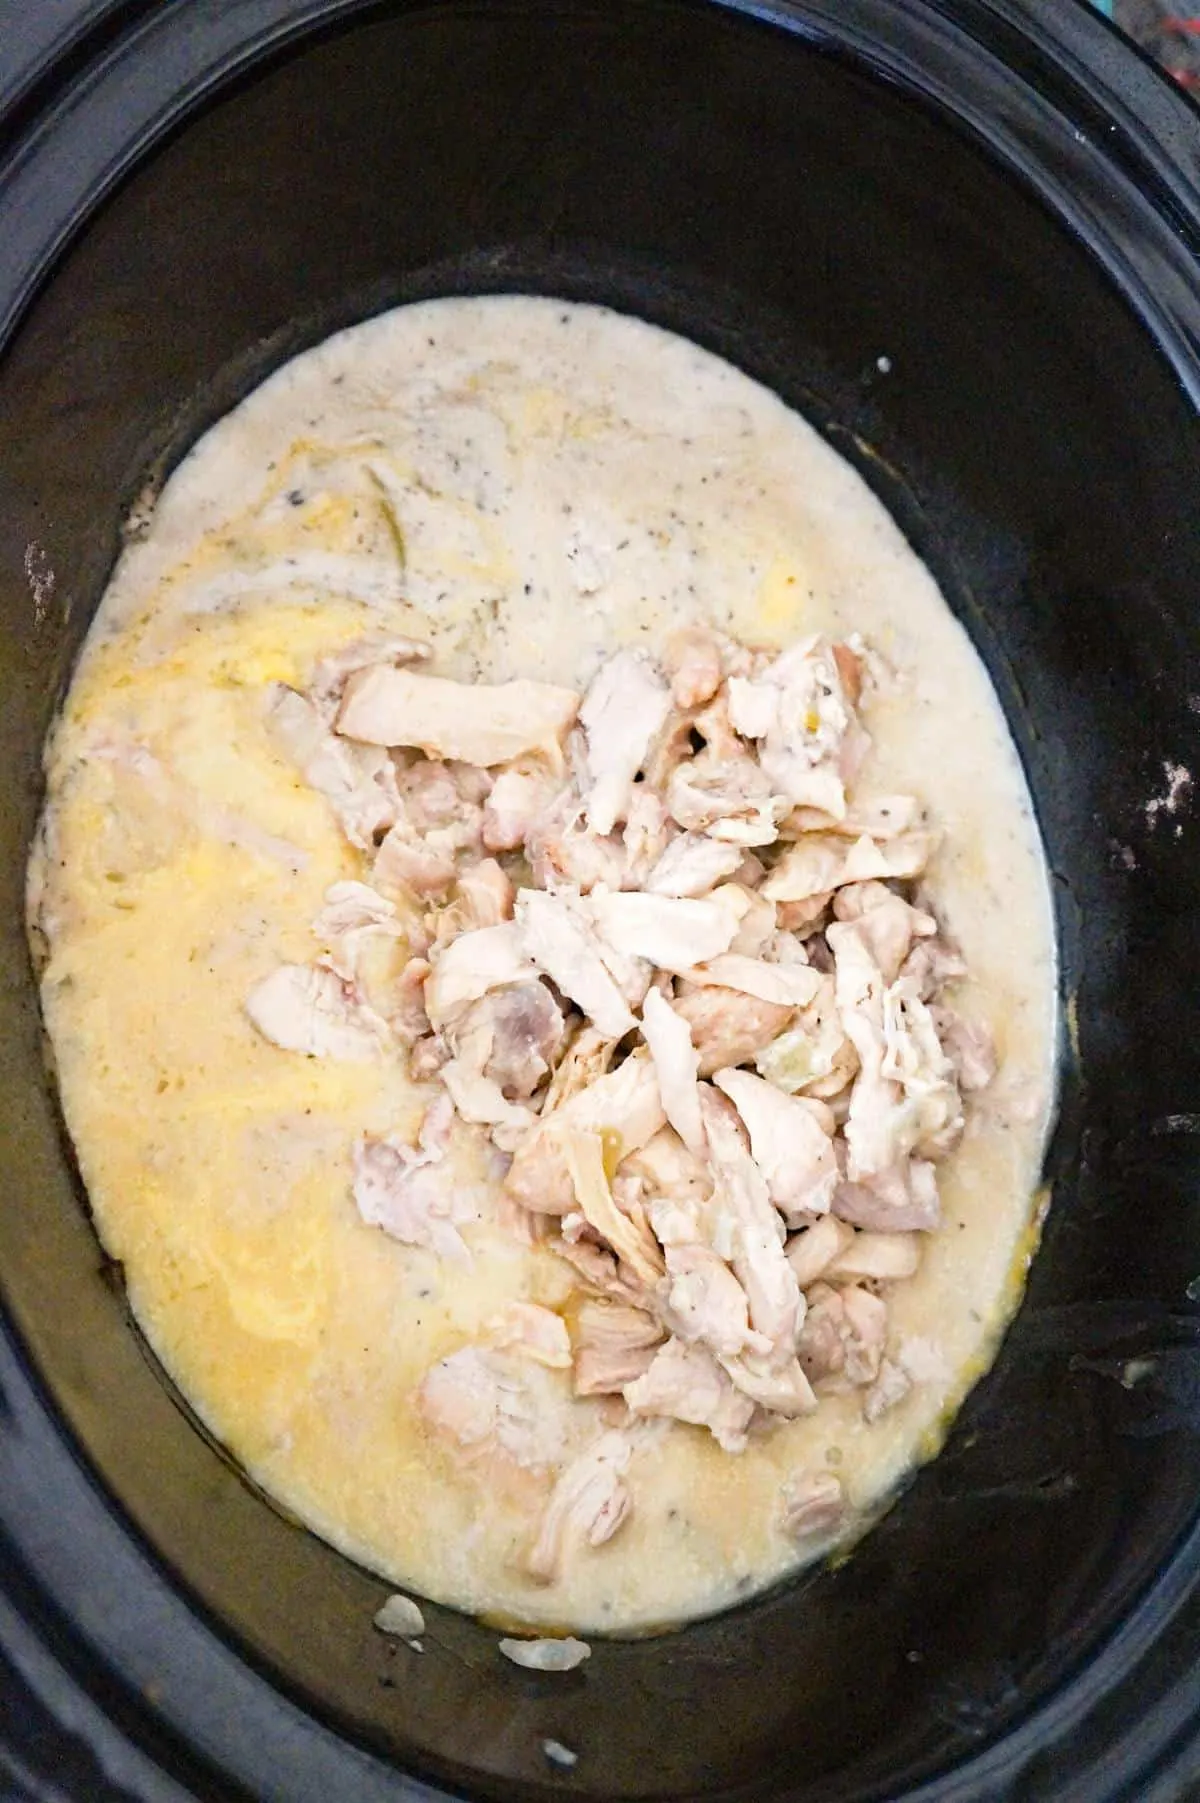 chopped chicken on top of cream soup mixture in a crock pot